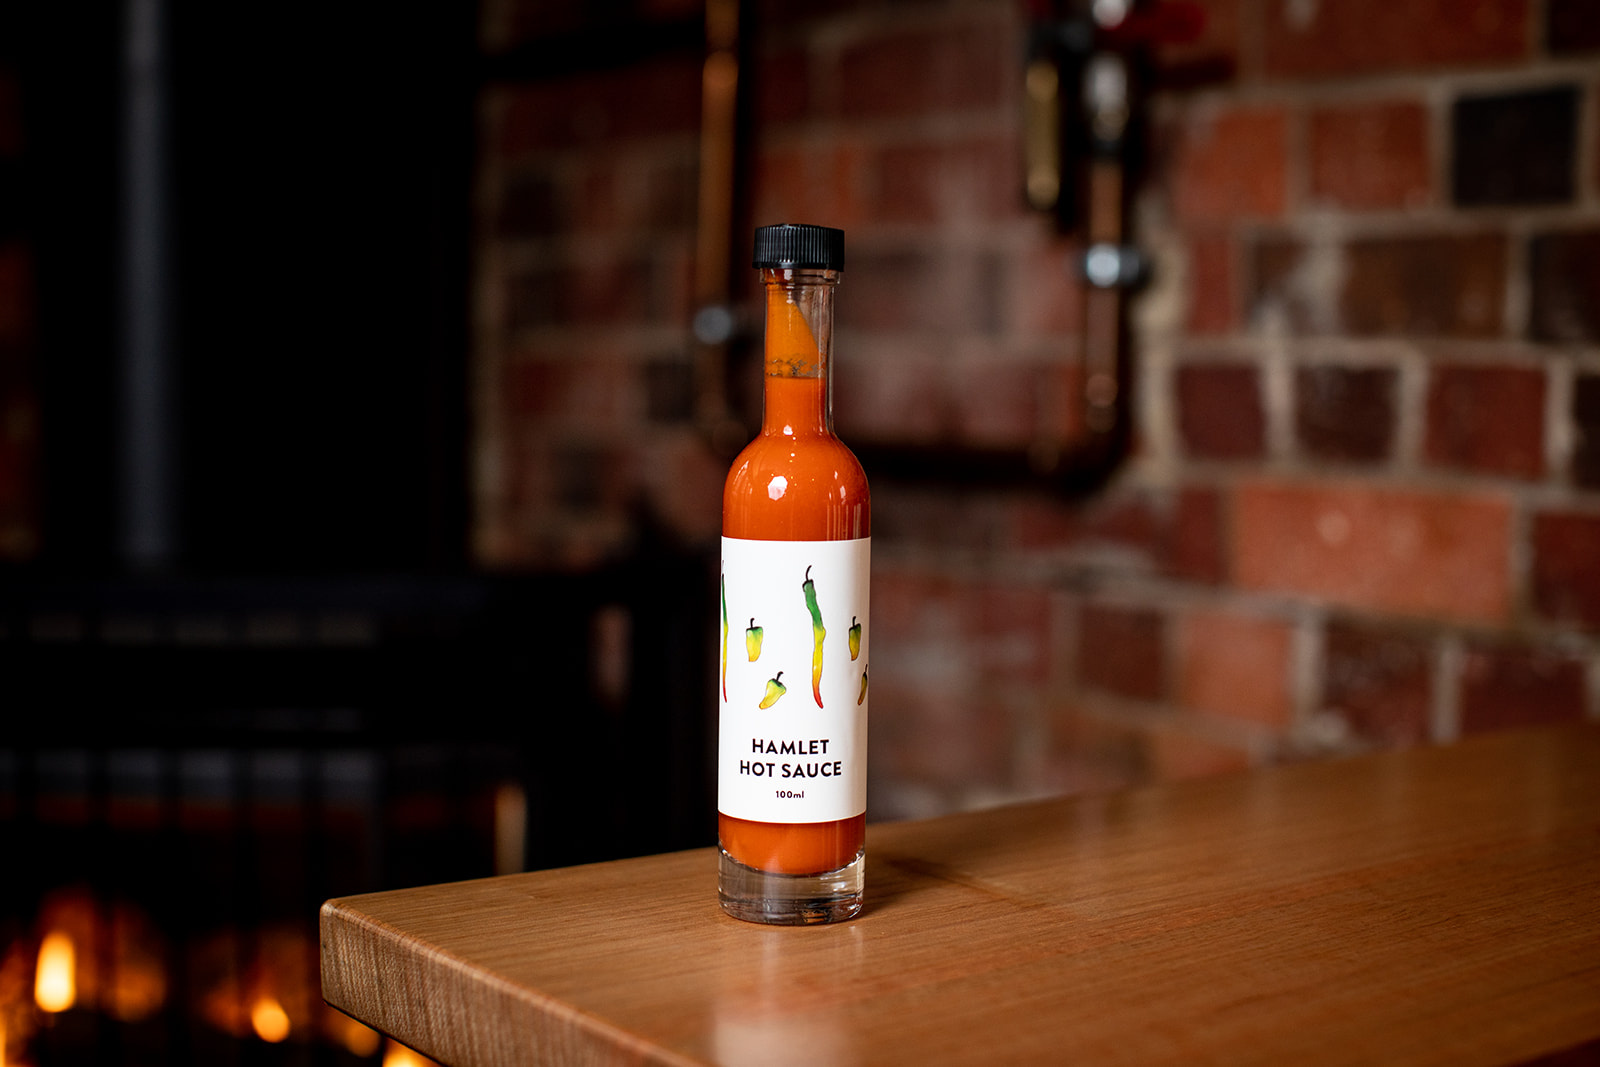 A bottle of Hamlet's house made Hot Sauce sitting on a timber table against a brick wall.